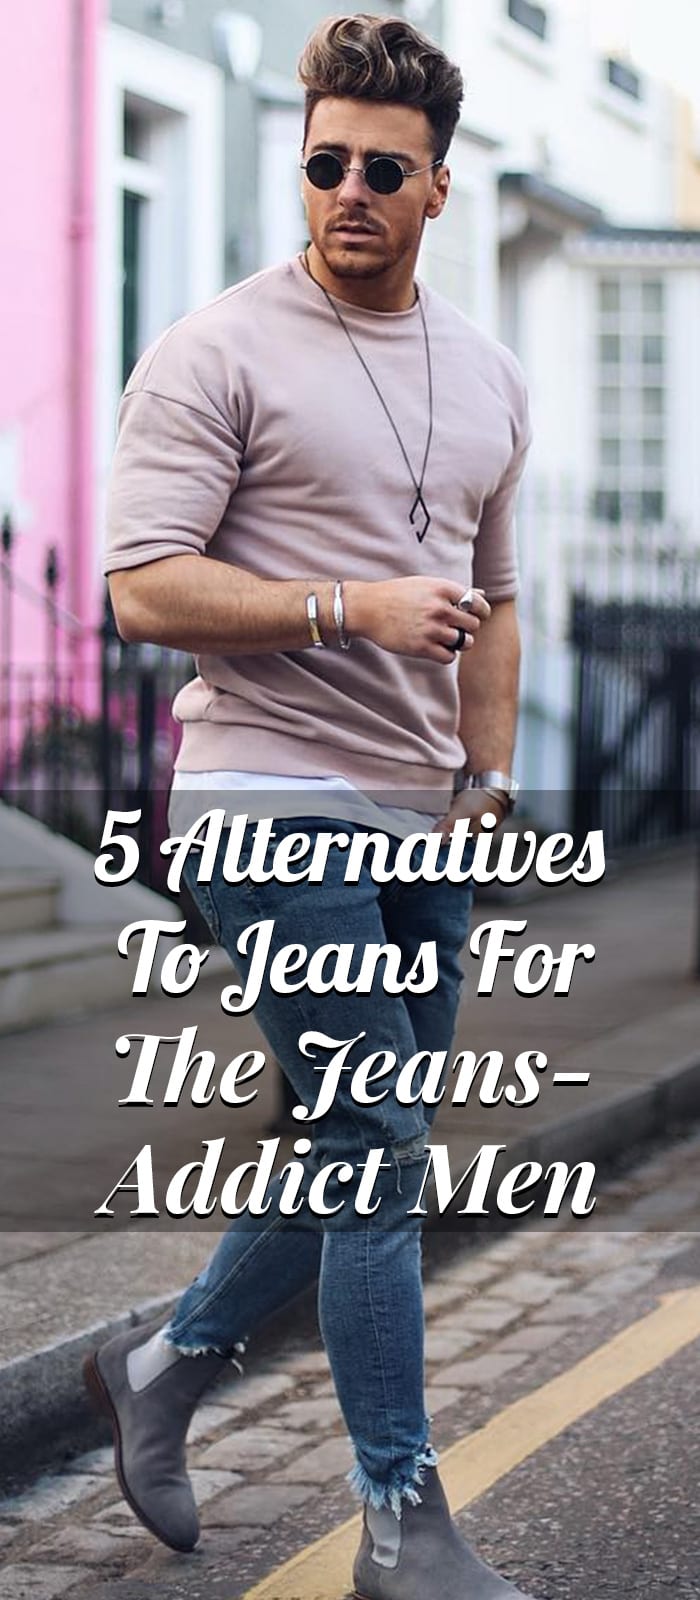 5 Alternatives To Jeans For The Jeans-Addict Men